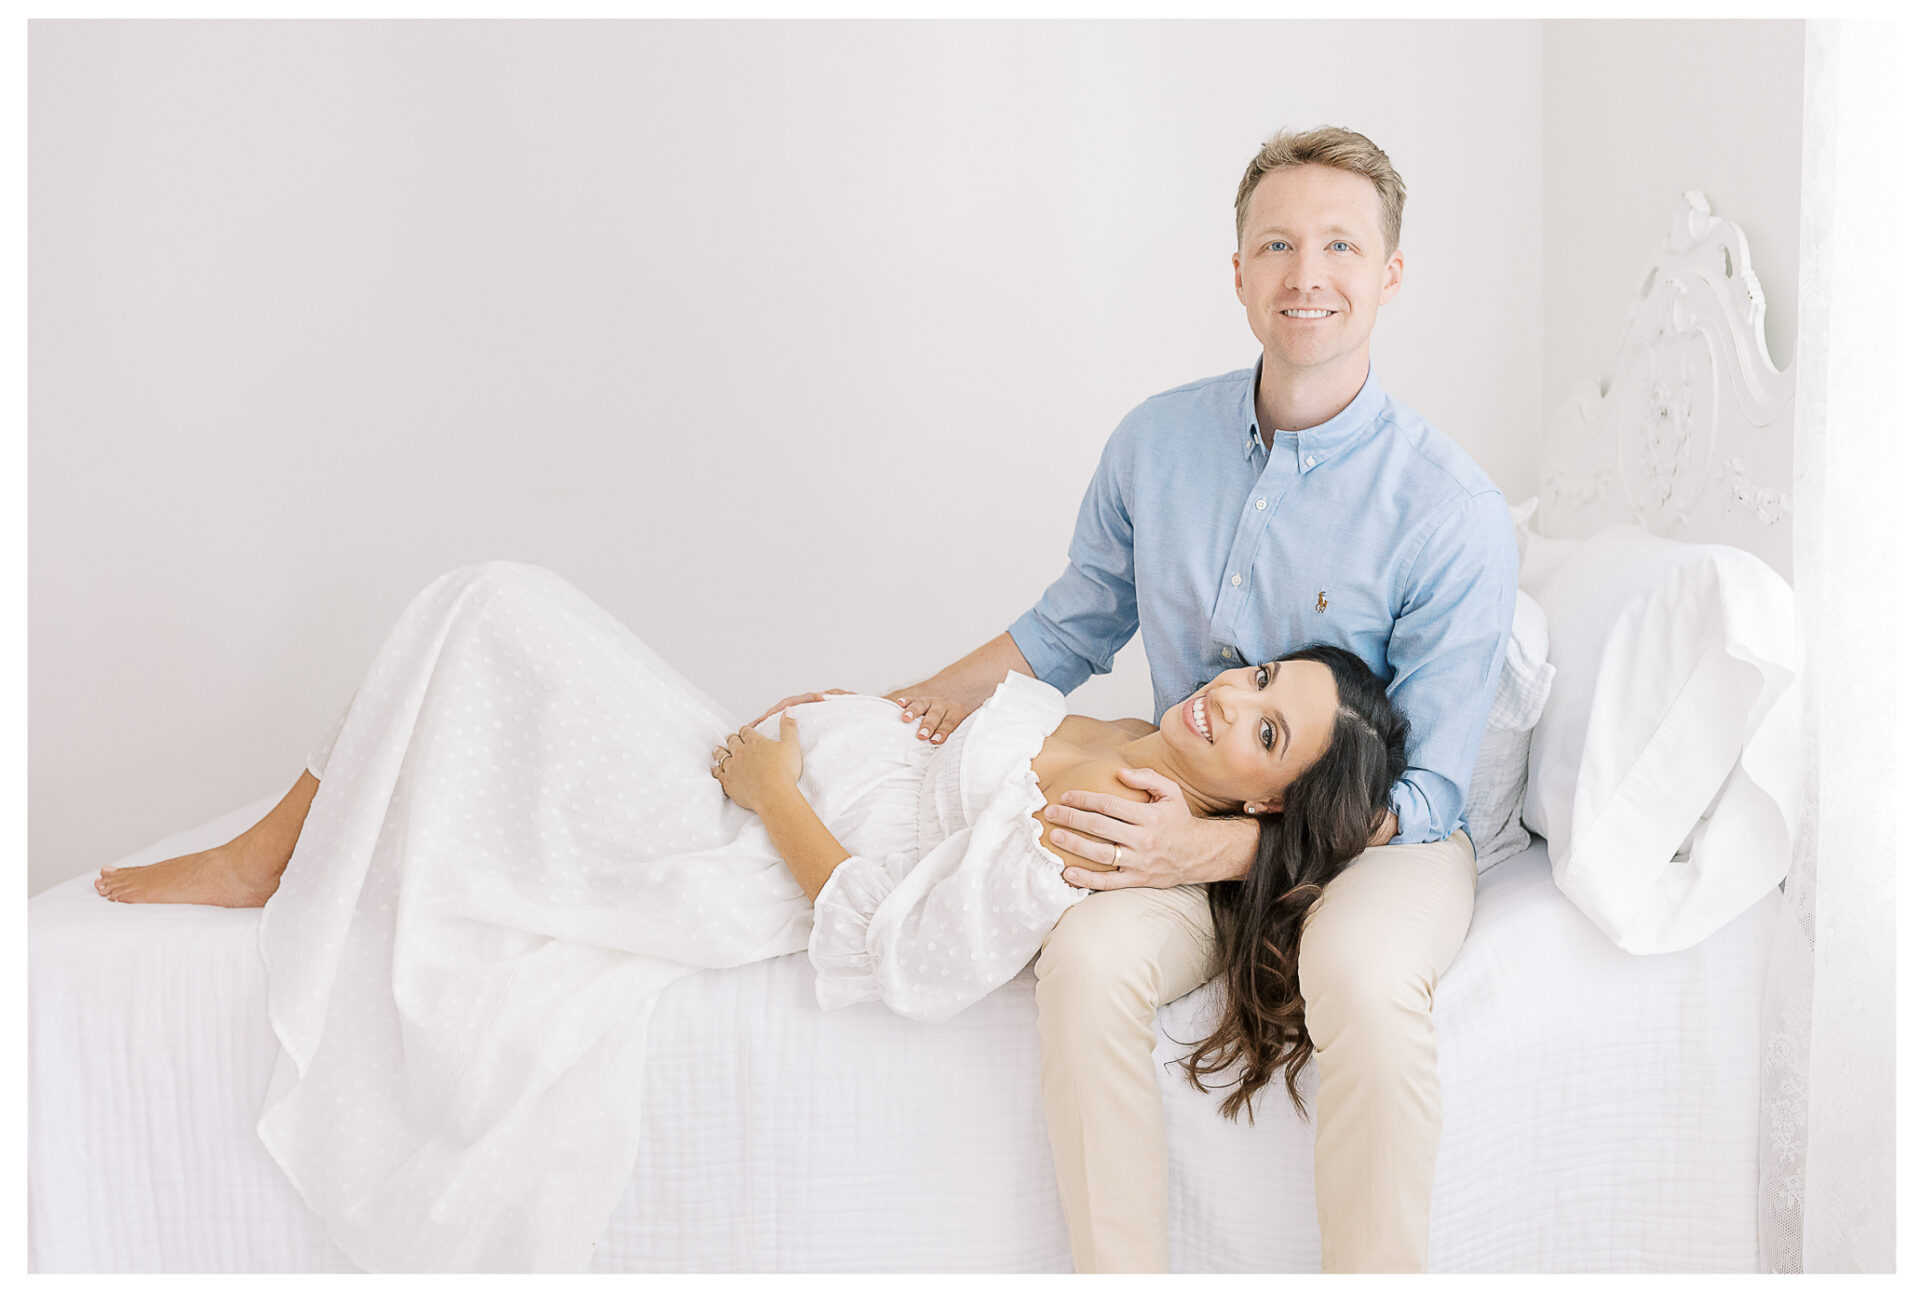 Winter Freire Photography | Natural Light Studio Maternity Session in Dayton, OH | Mama-to-be and husband smiling together with their hands on the baby bump